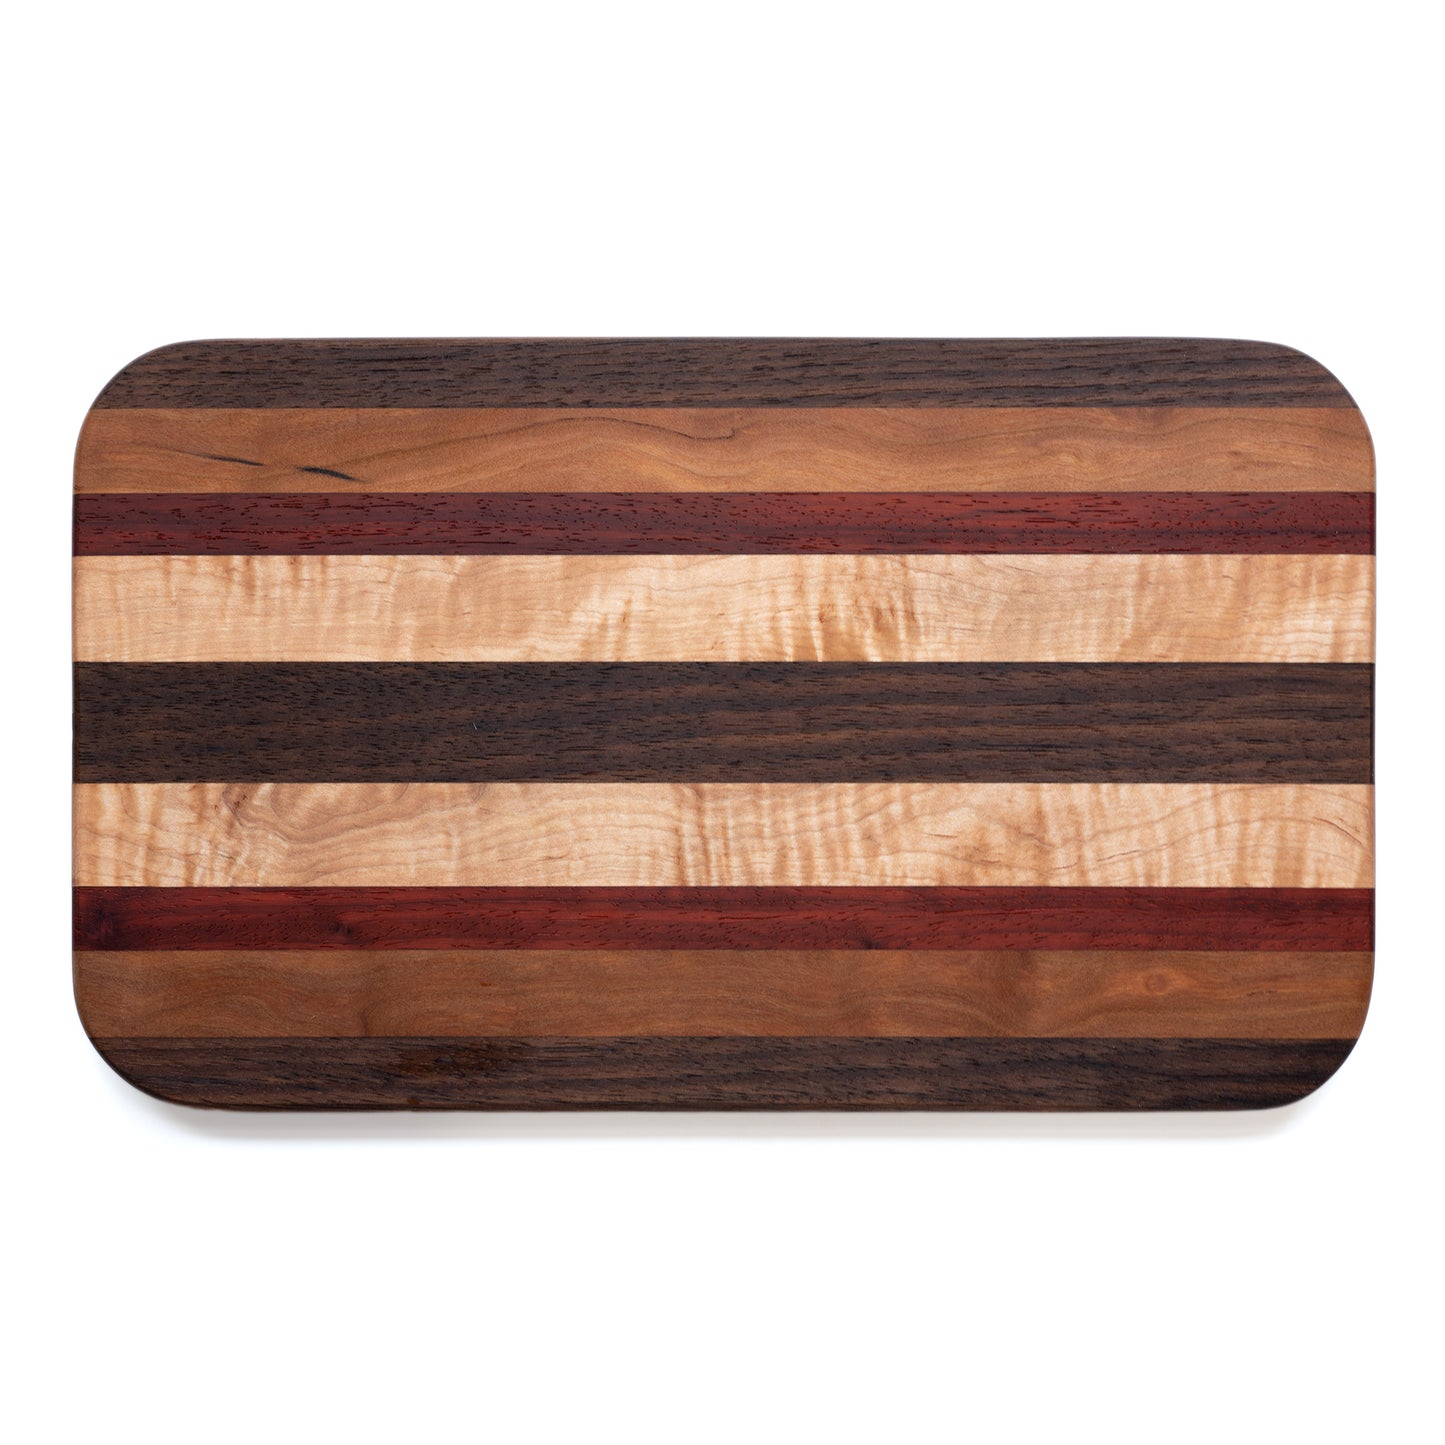 Mixed Woods Handcrafted Charcuterie Board